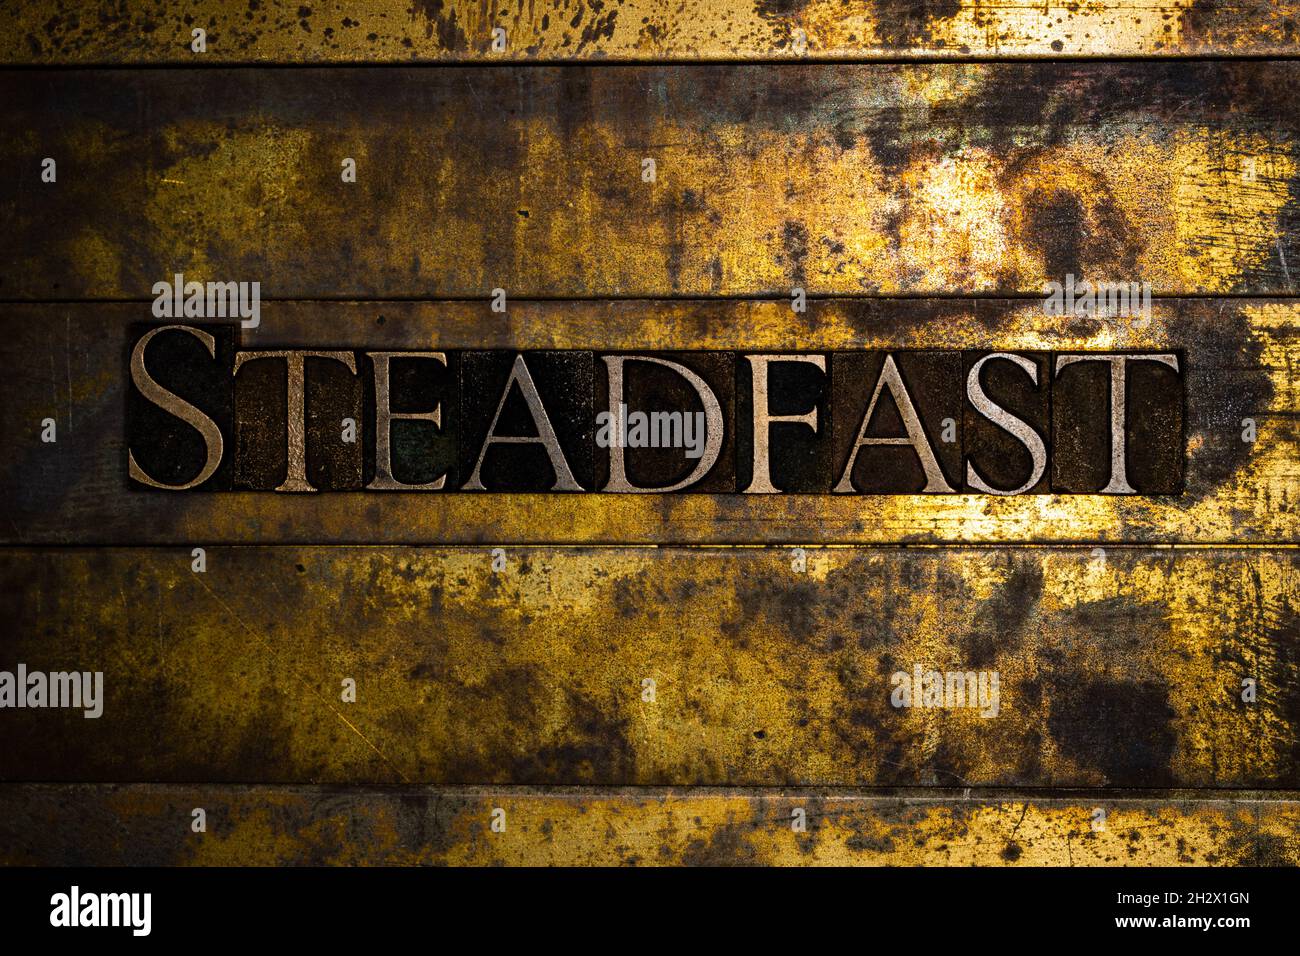 Steadfast text on textured grunge copper and vintage gold background Stock Photo